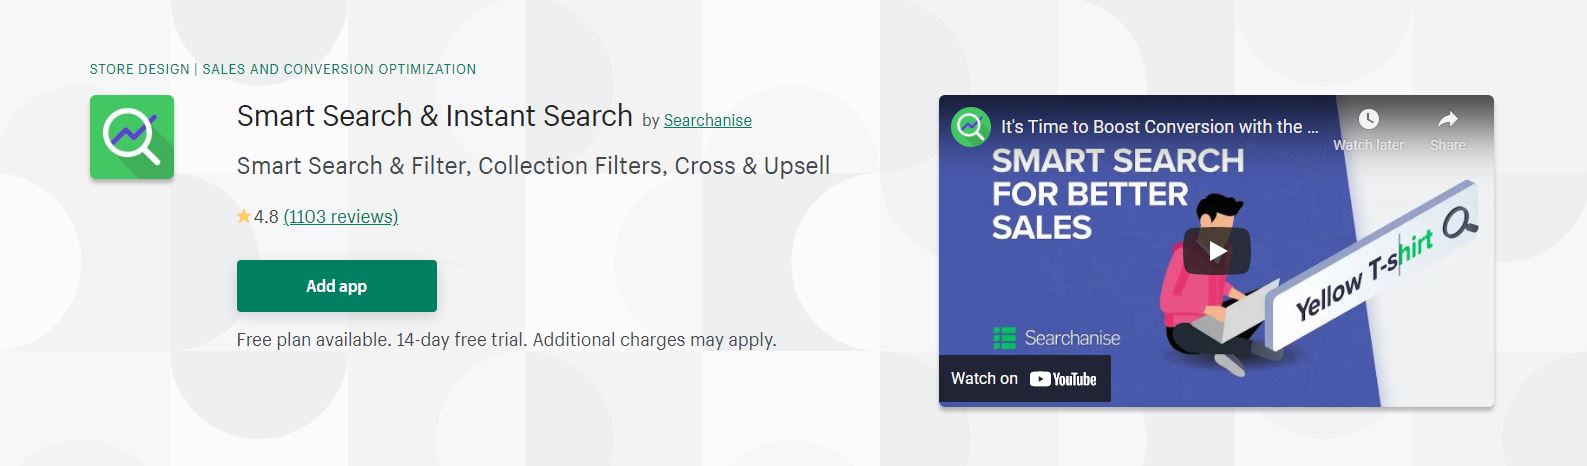 Smart Search & Instant Search